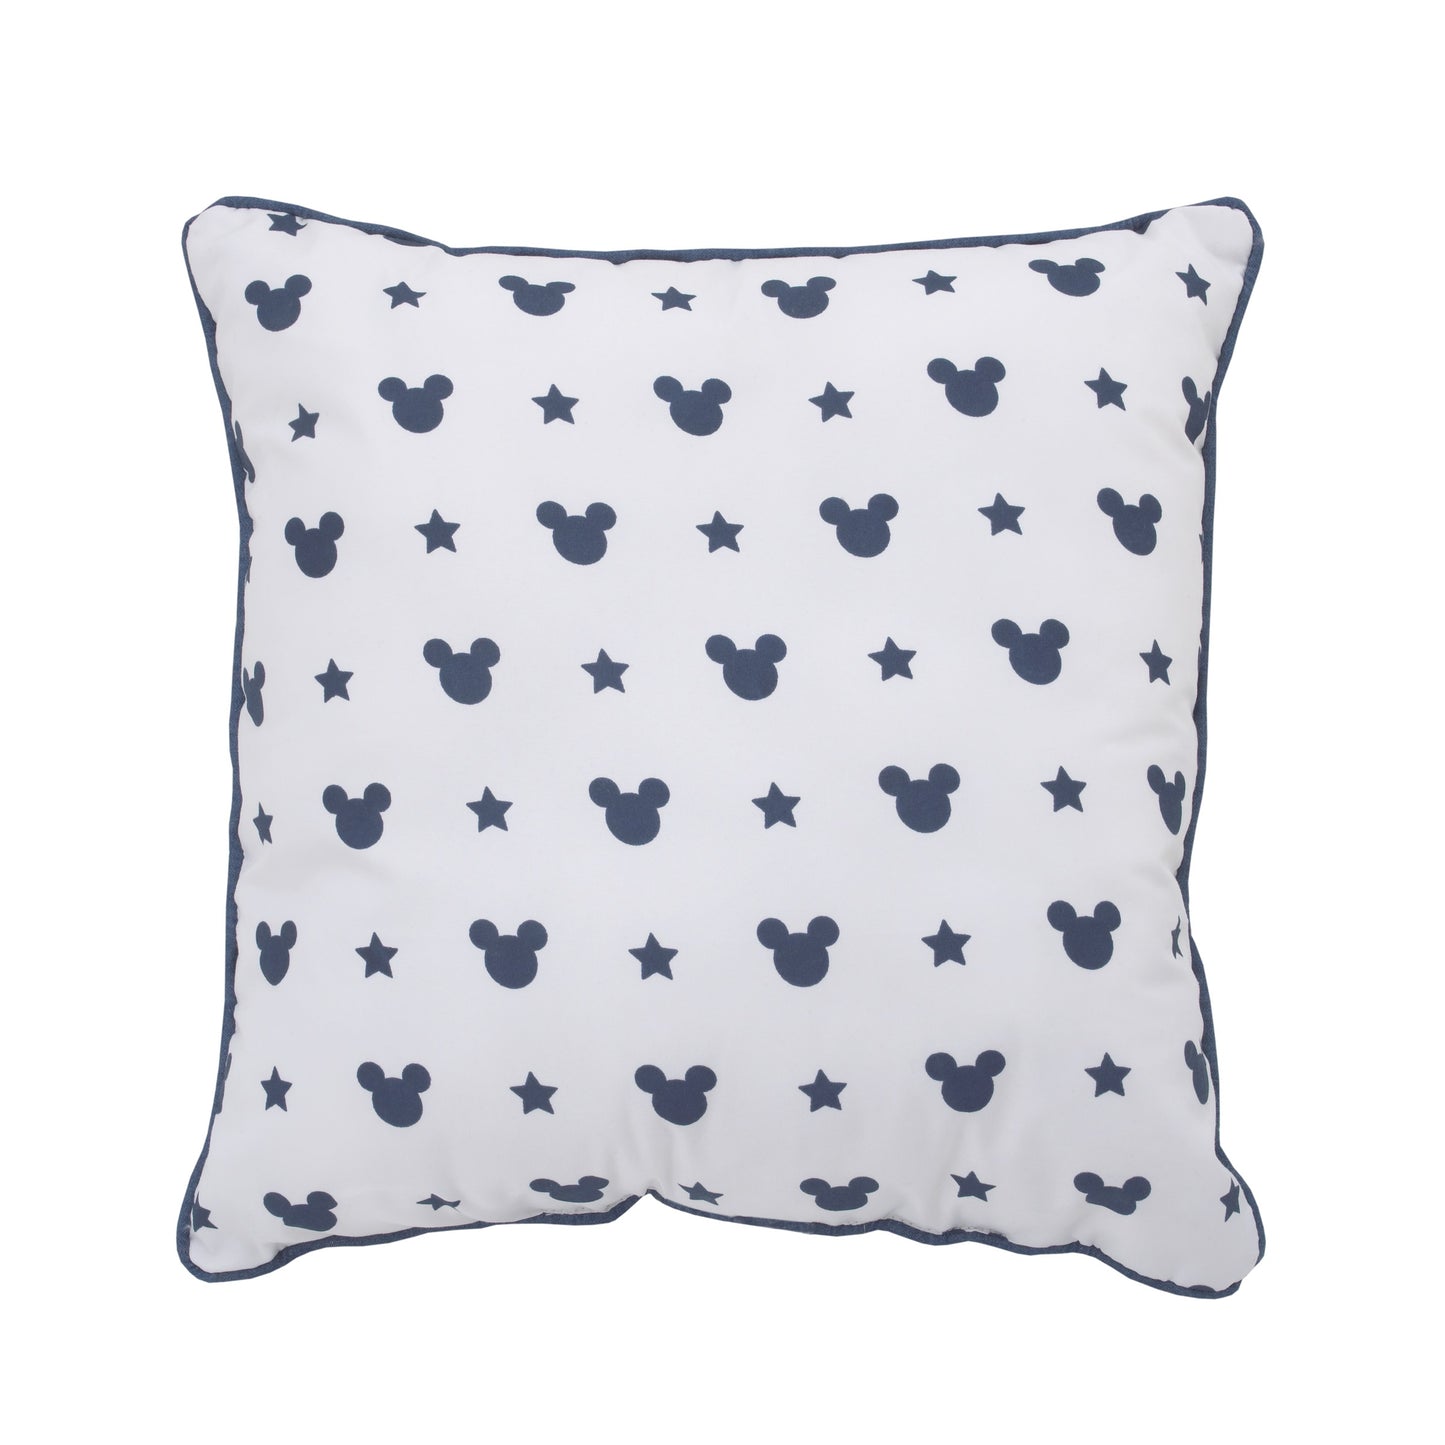 Disney Mickey Mouse Hello World - Navy, Grey and White Appliqued Decorative Pillow